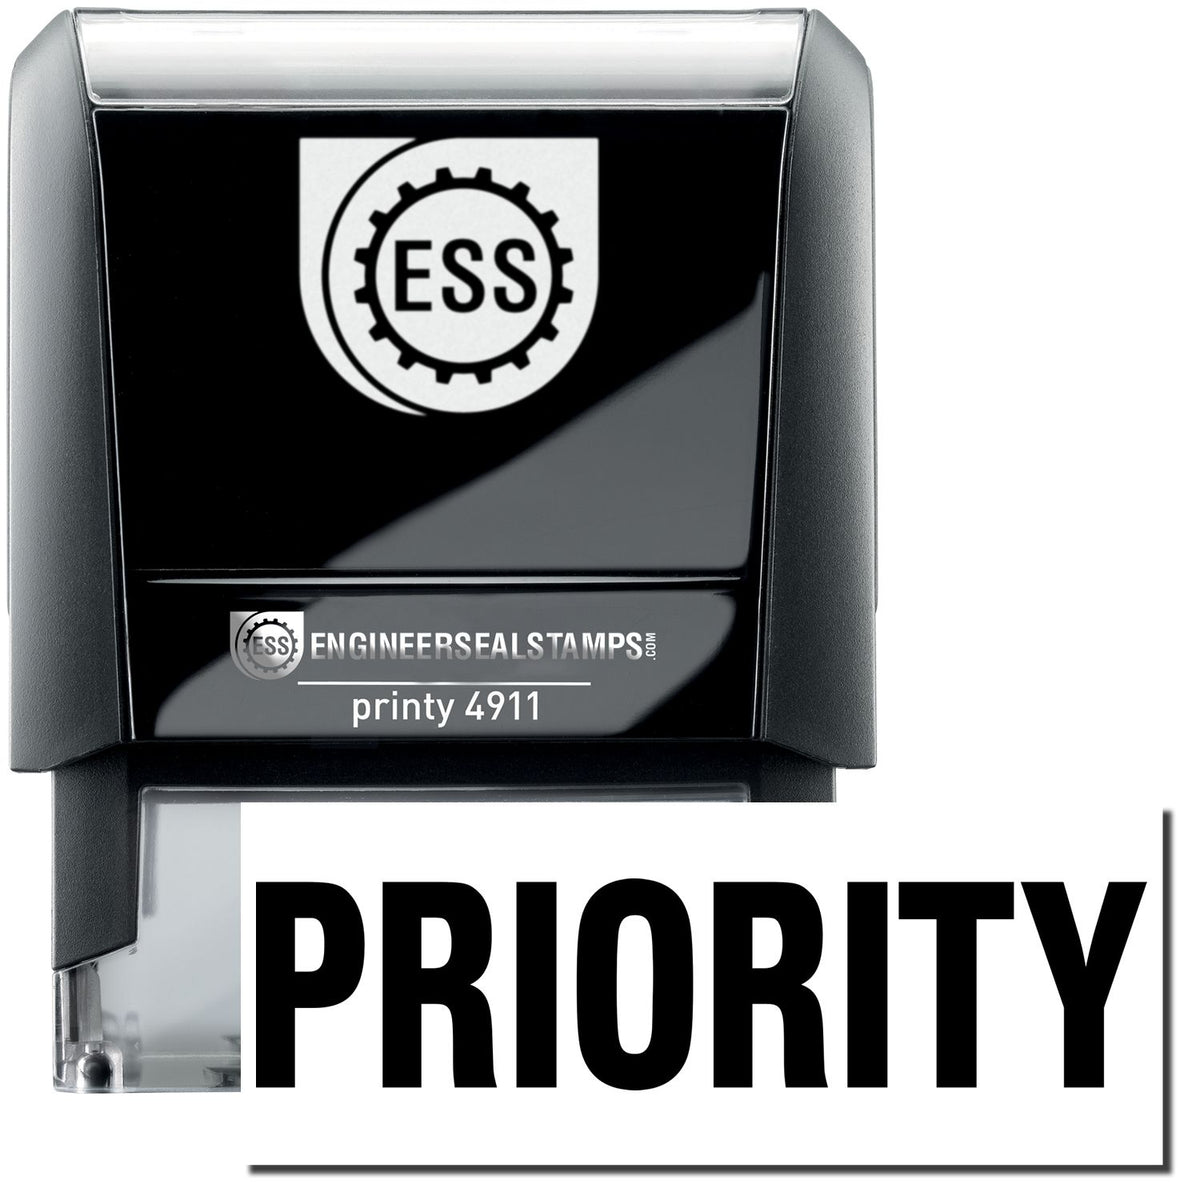 A self-inking stamp with a stamped image showing how the text &quot;PRIORITY&quot; in bold font is displayed after stamping.